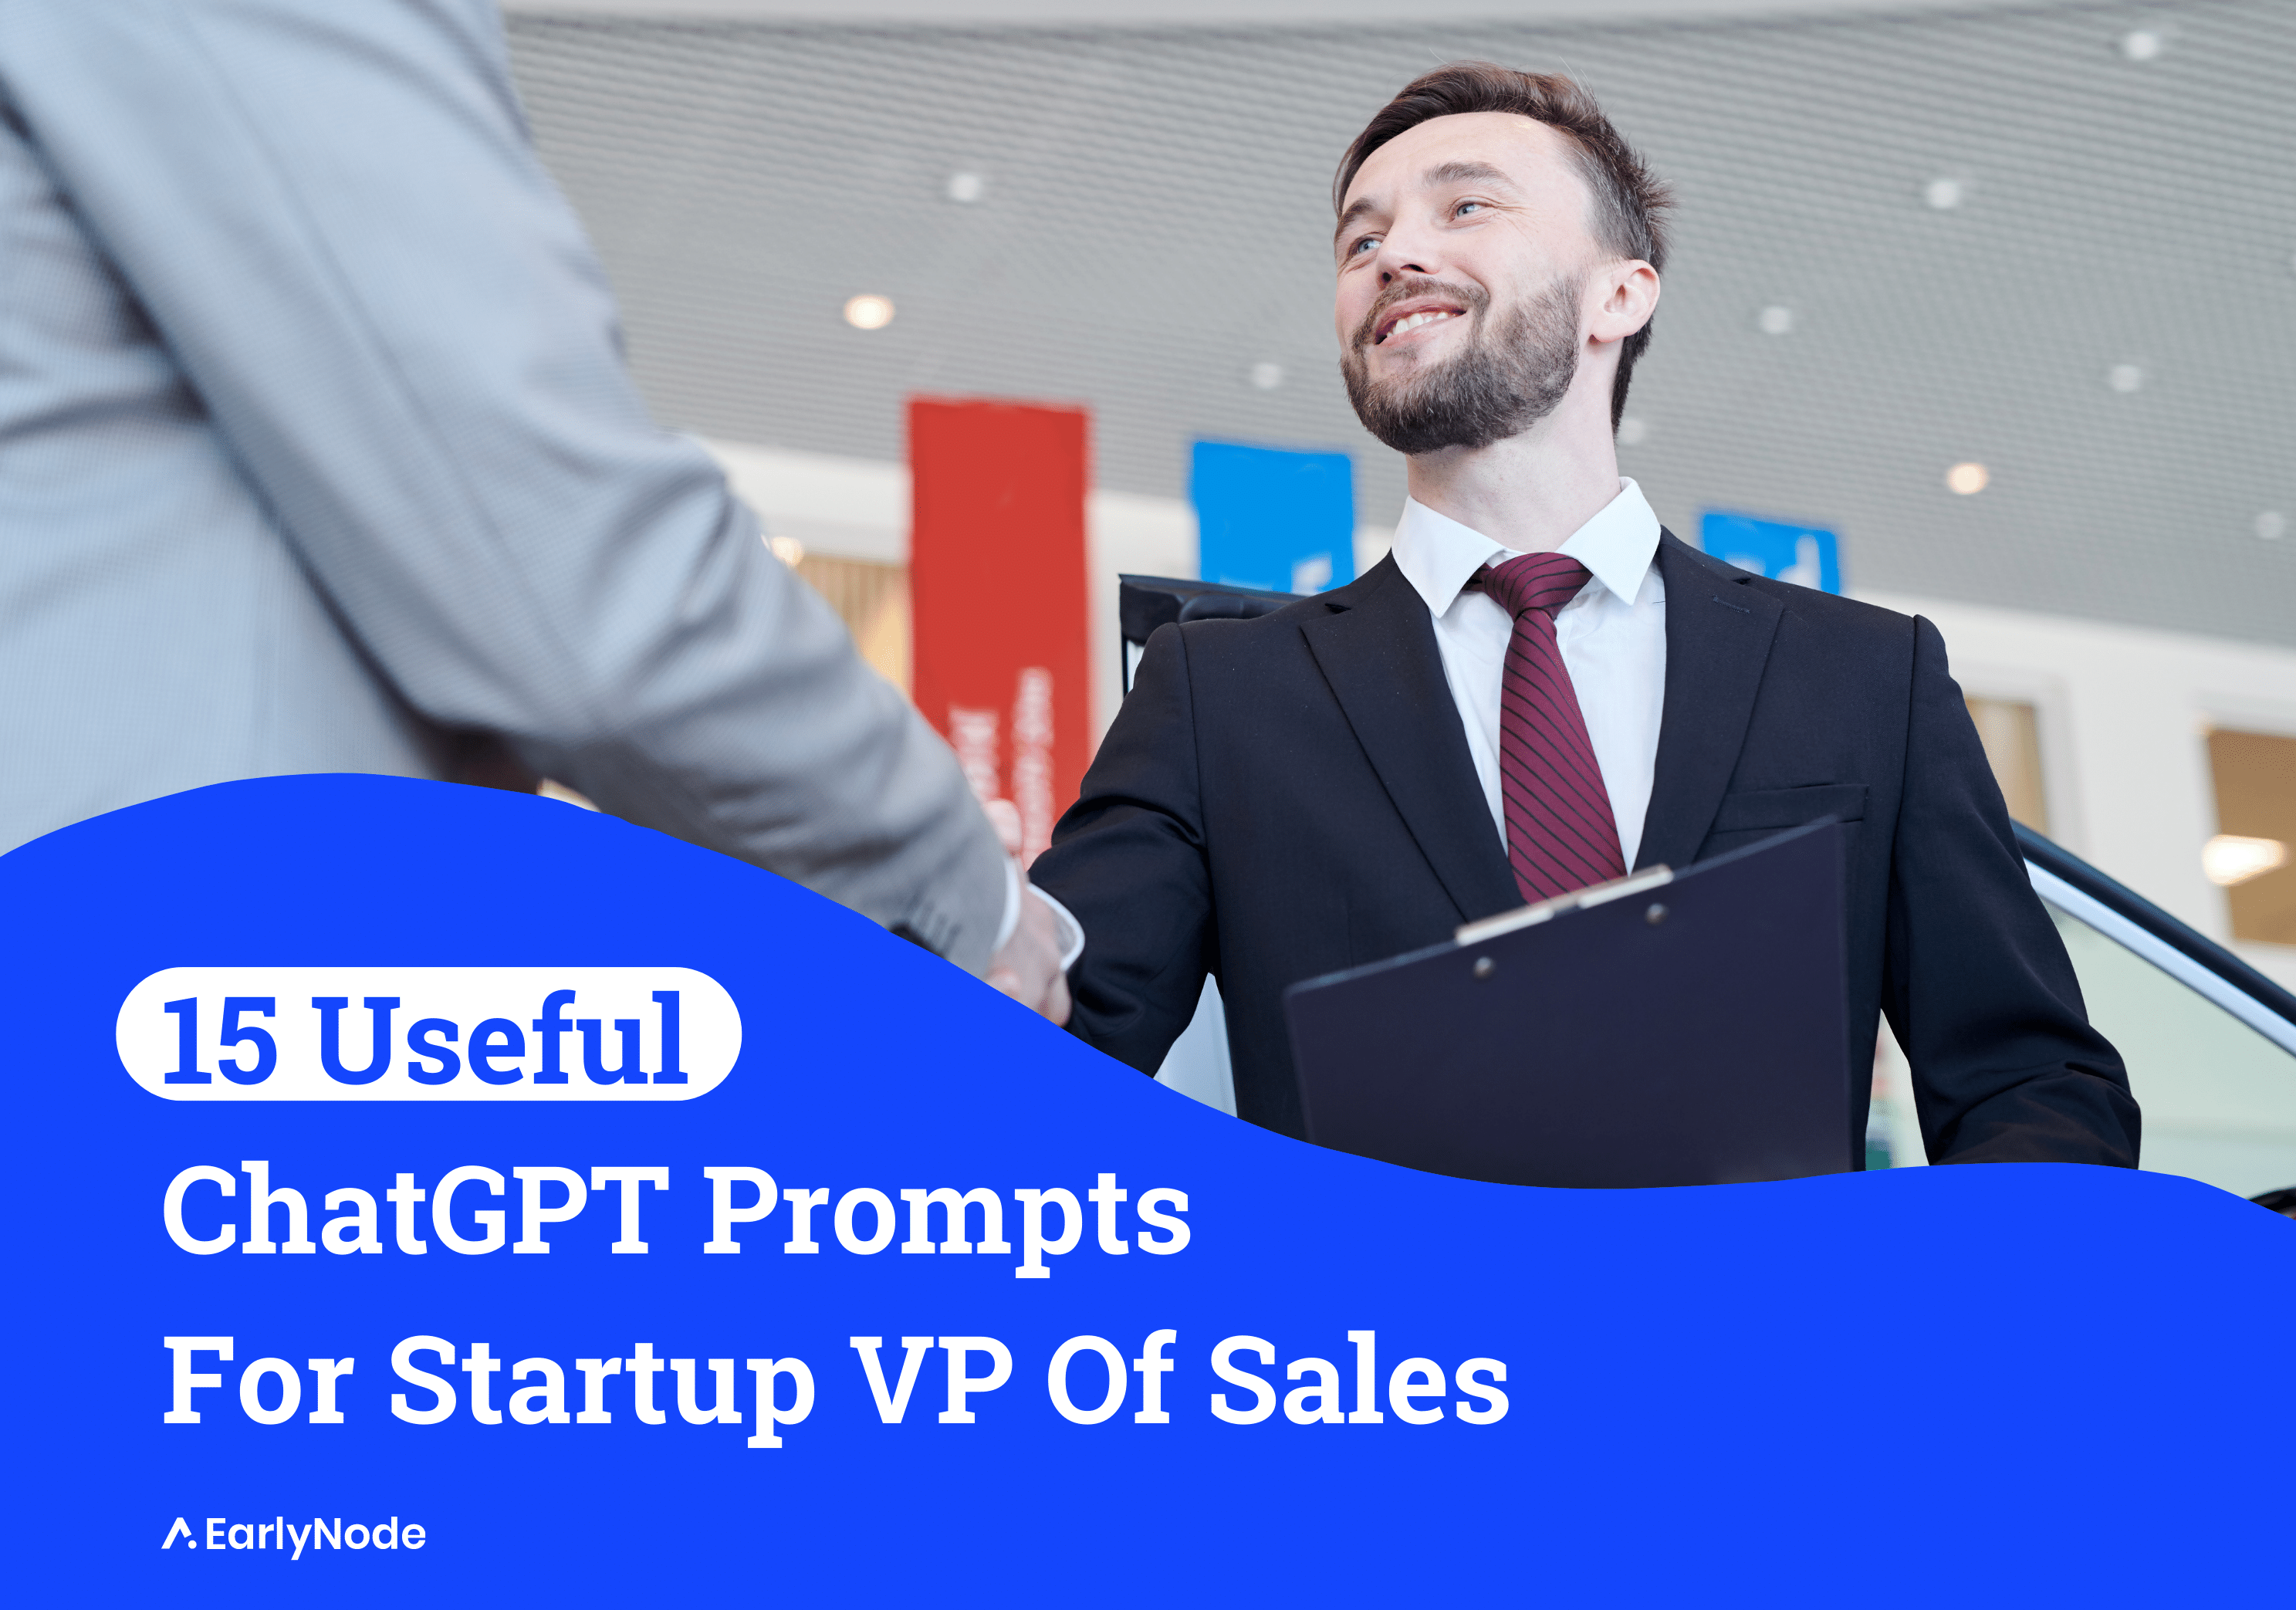 15 Incredibly Useful ChatGPT Prompts For VP Sales